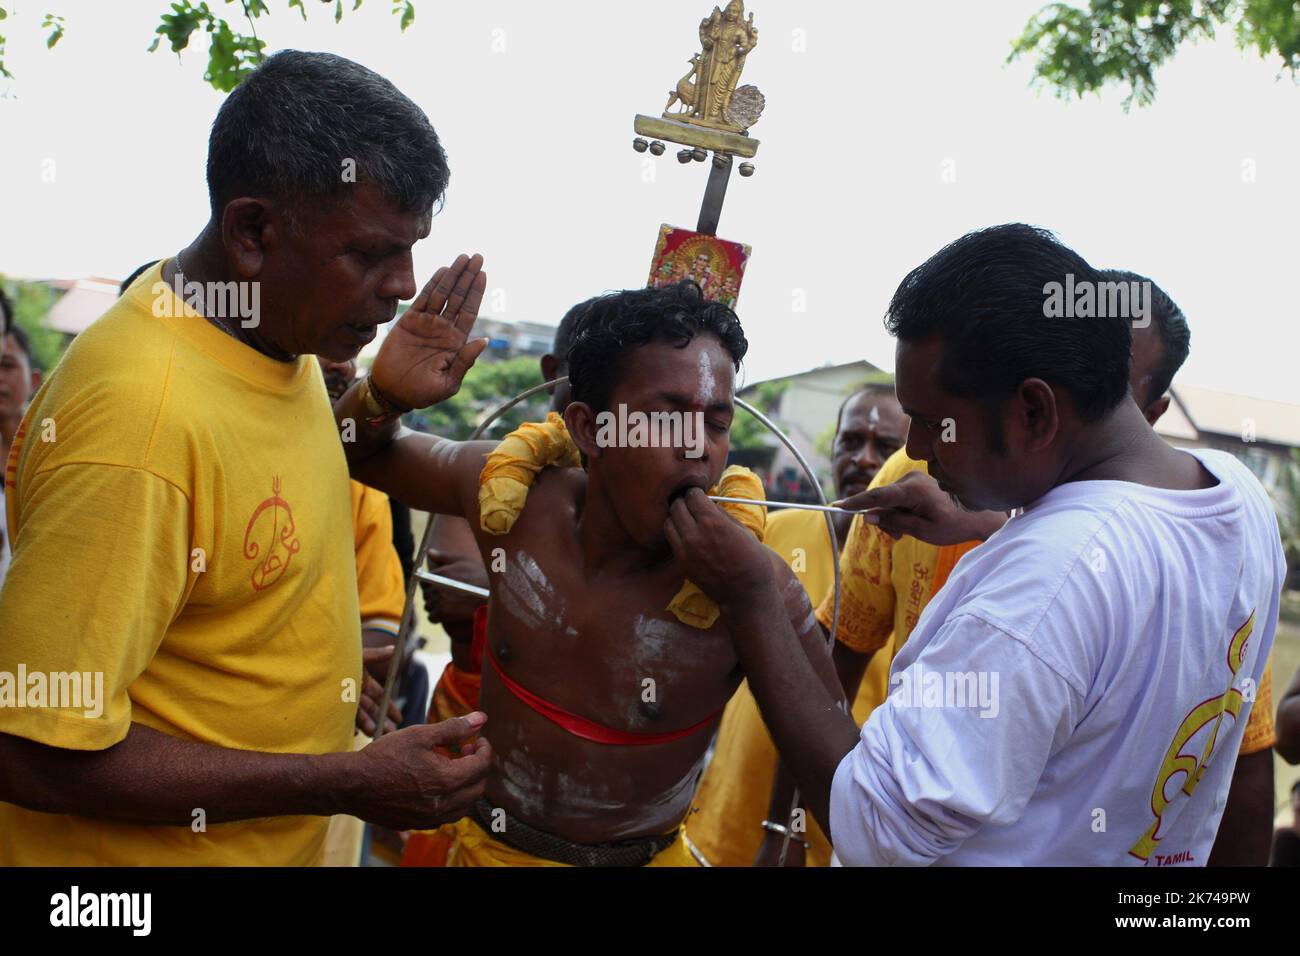 Banda Aceh, Indonesia - April 16.2017: Adherents of Hinduism in Banda Aceh, Indonesia celebrated ritual 'Maha Puja Pangguni Uthiram' in Andawa Palani temple, this ritual as to pray to 'God Murugan,' thanked and make vows and pray that mankind may live in peace and prosperity.  Stock Photo